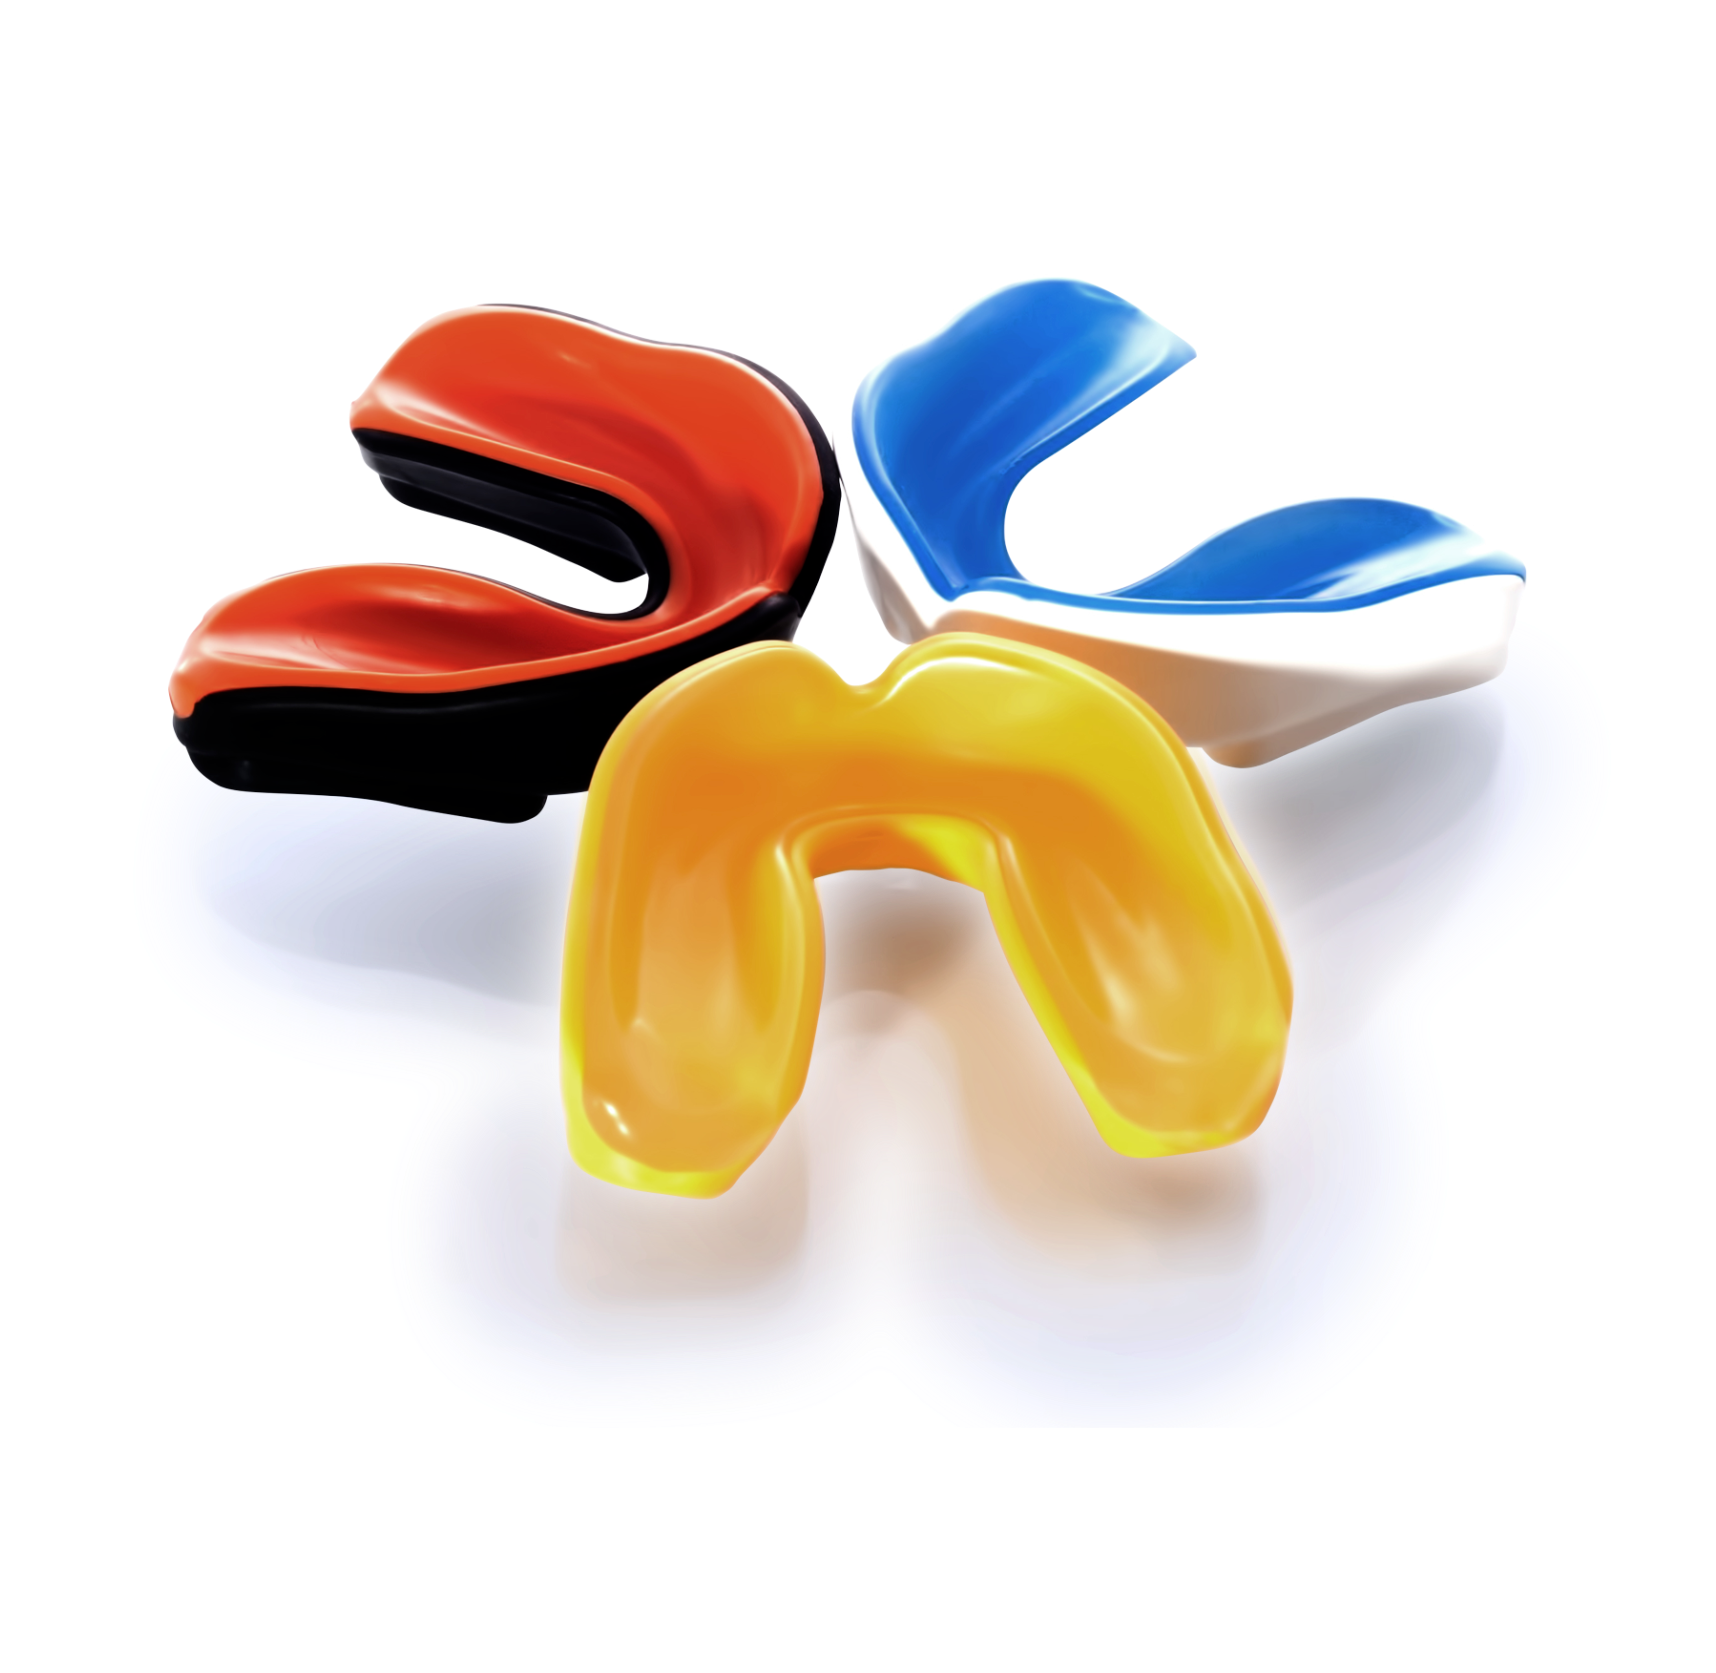 Three mouth guards of different colors are sitting on a white surface